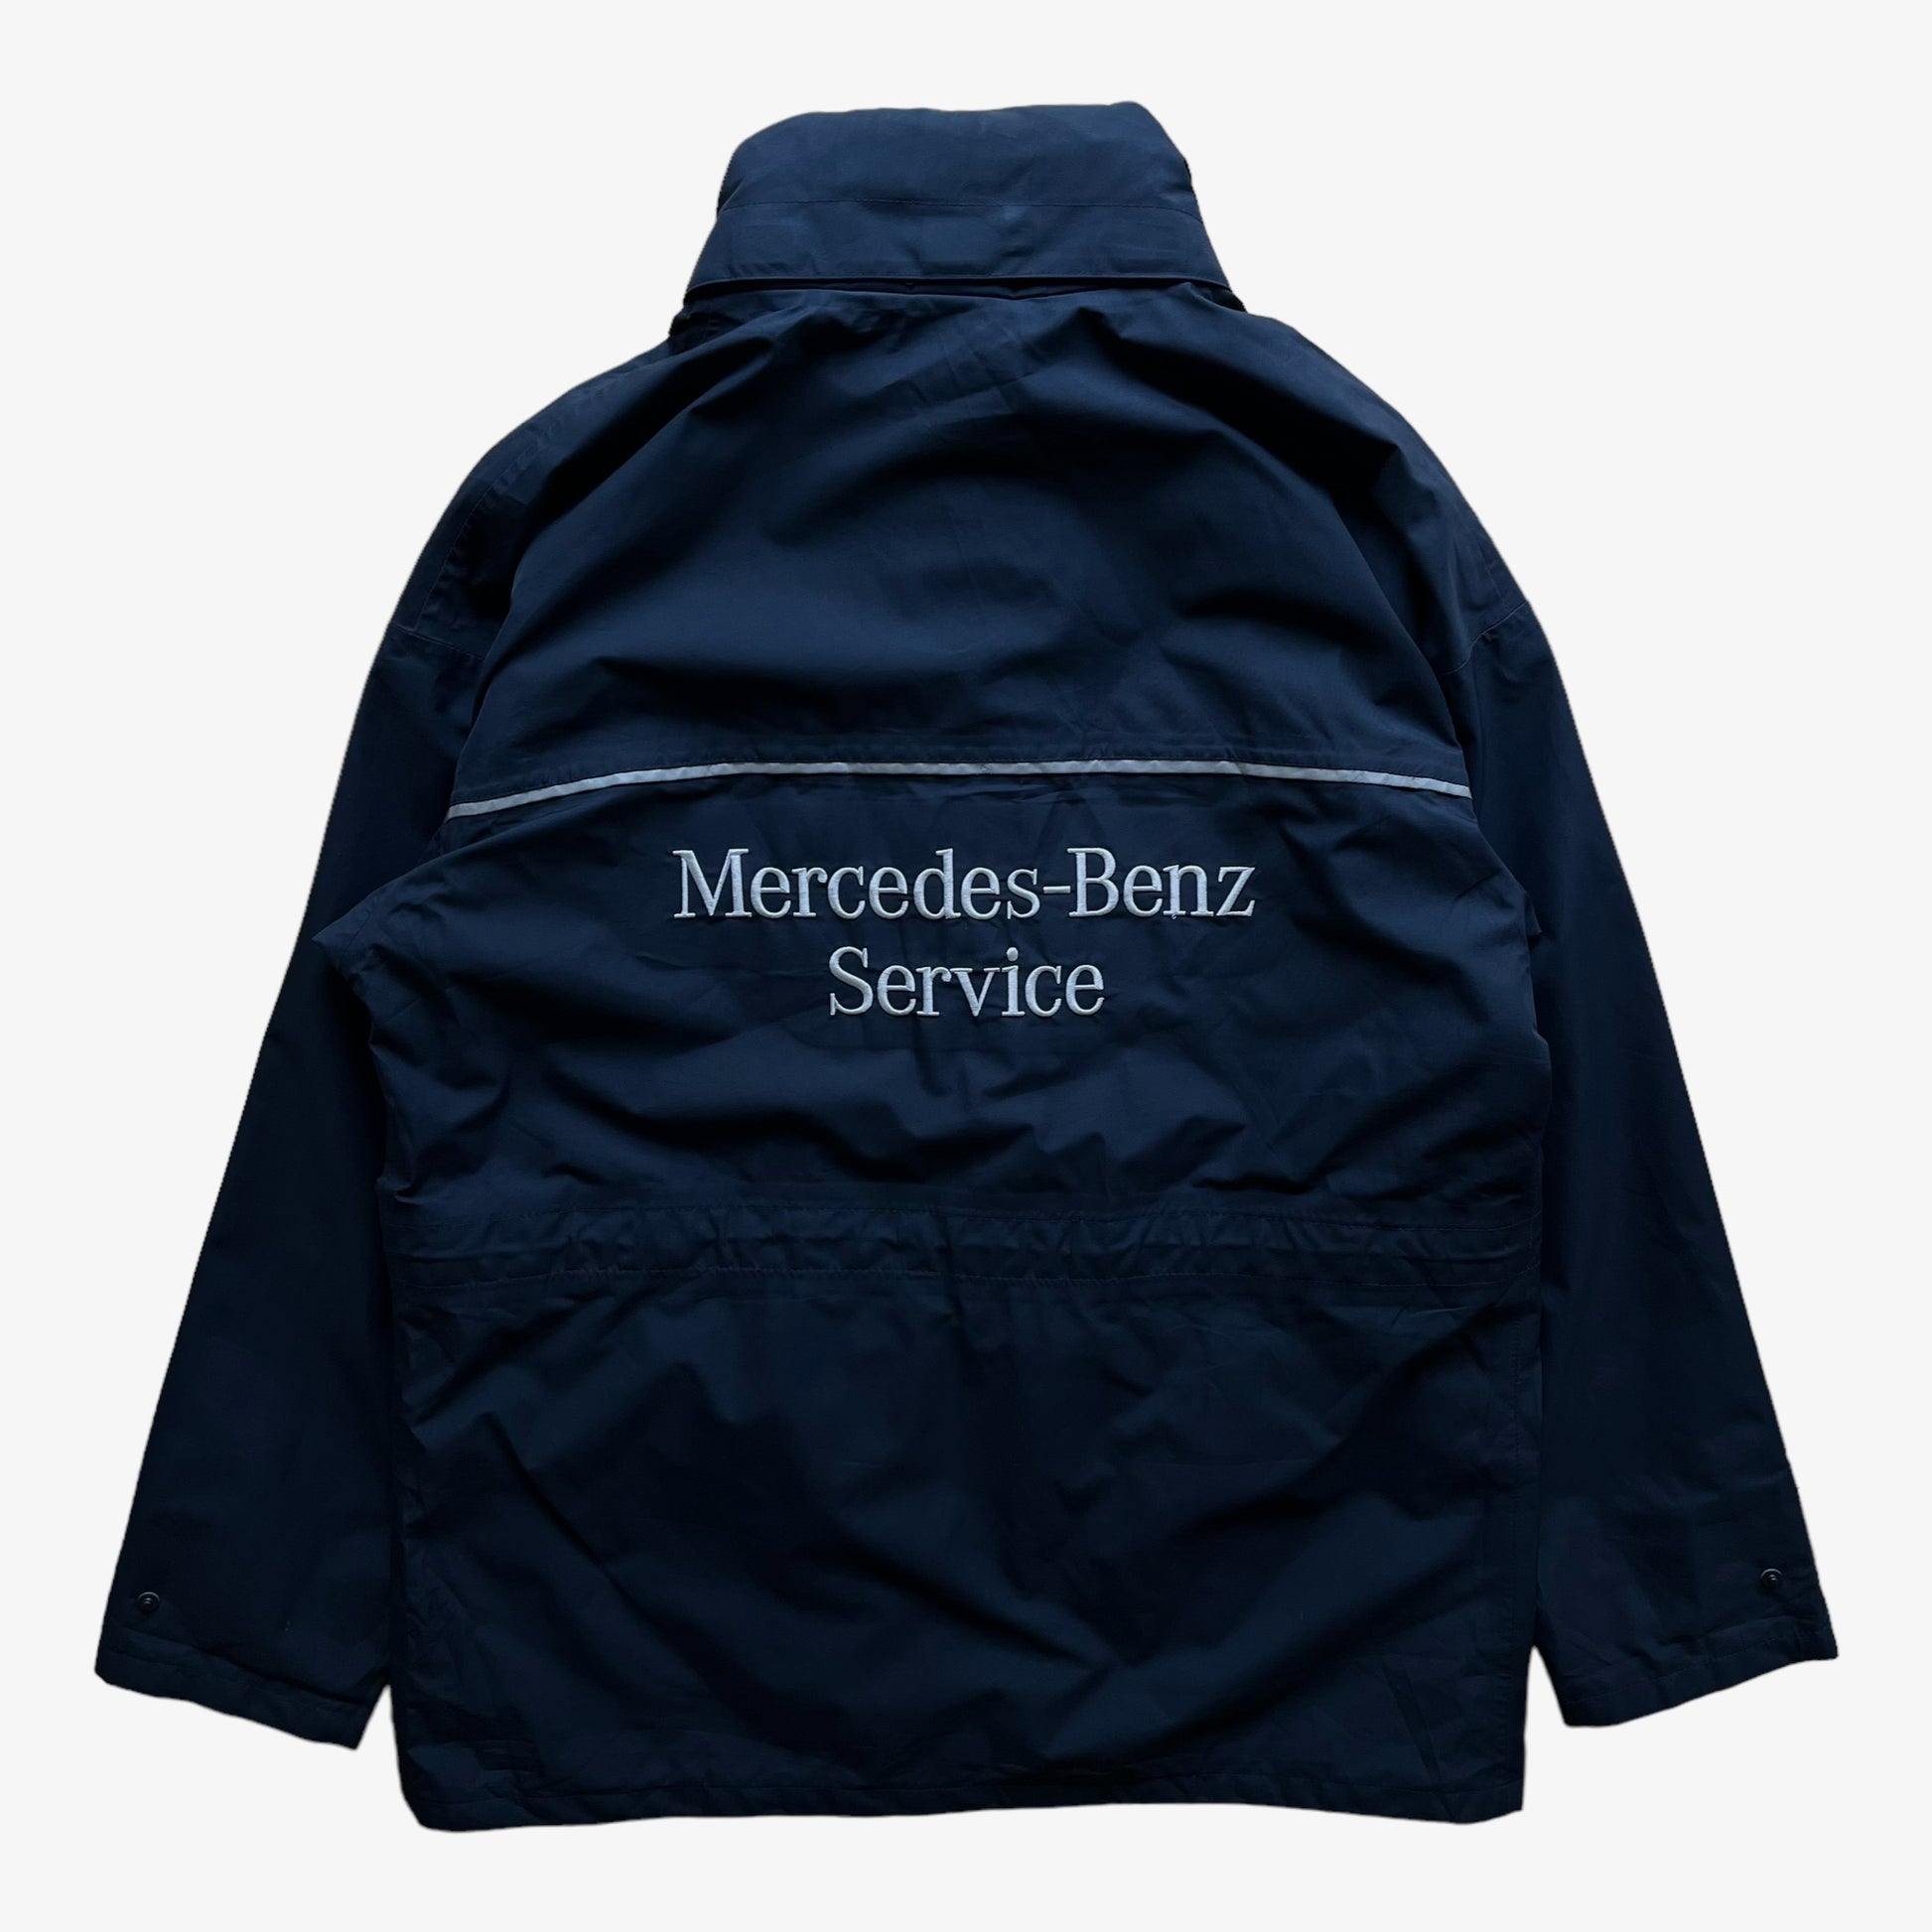 Vintage 90s Mercedes Benz Service Jacket With Back Spell Out Back - Casspios Dream